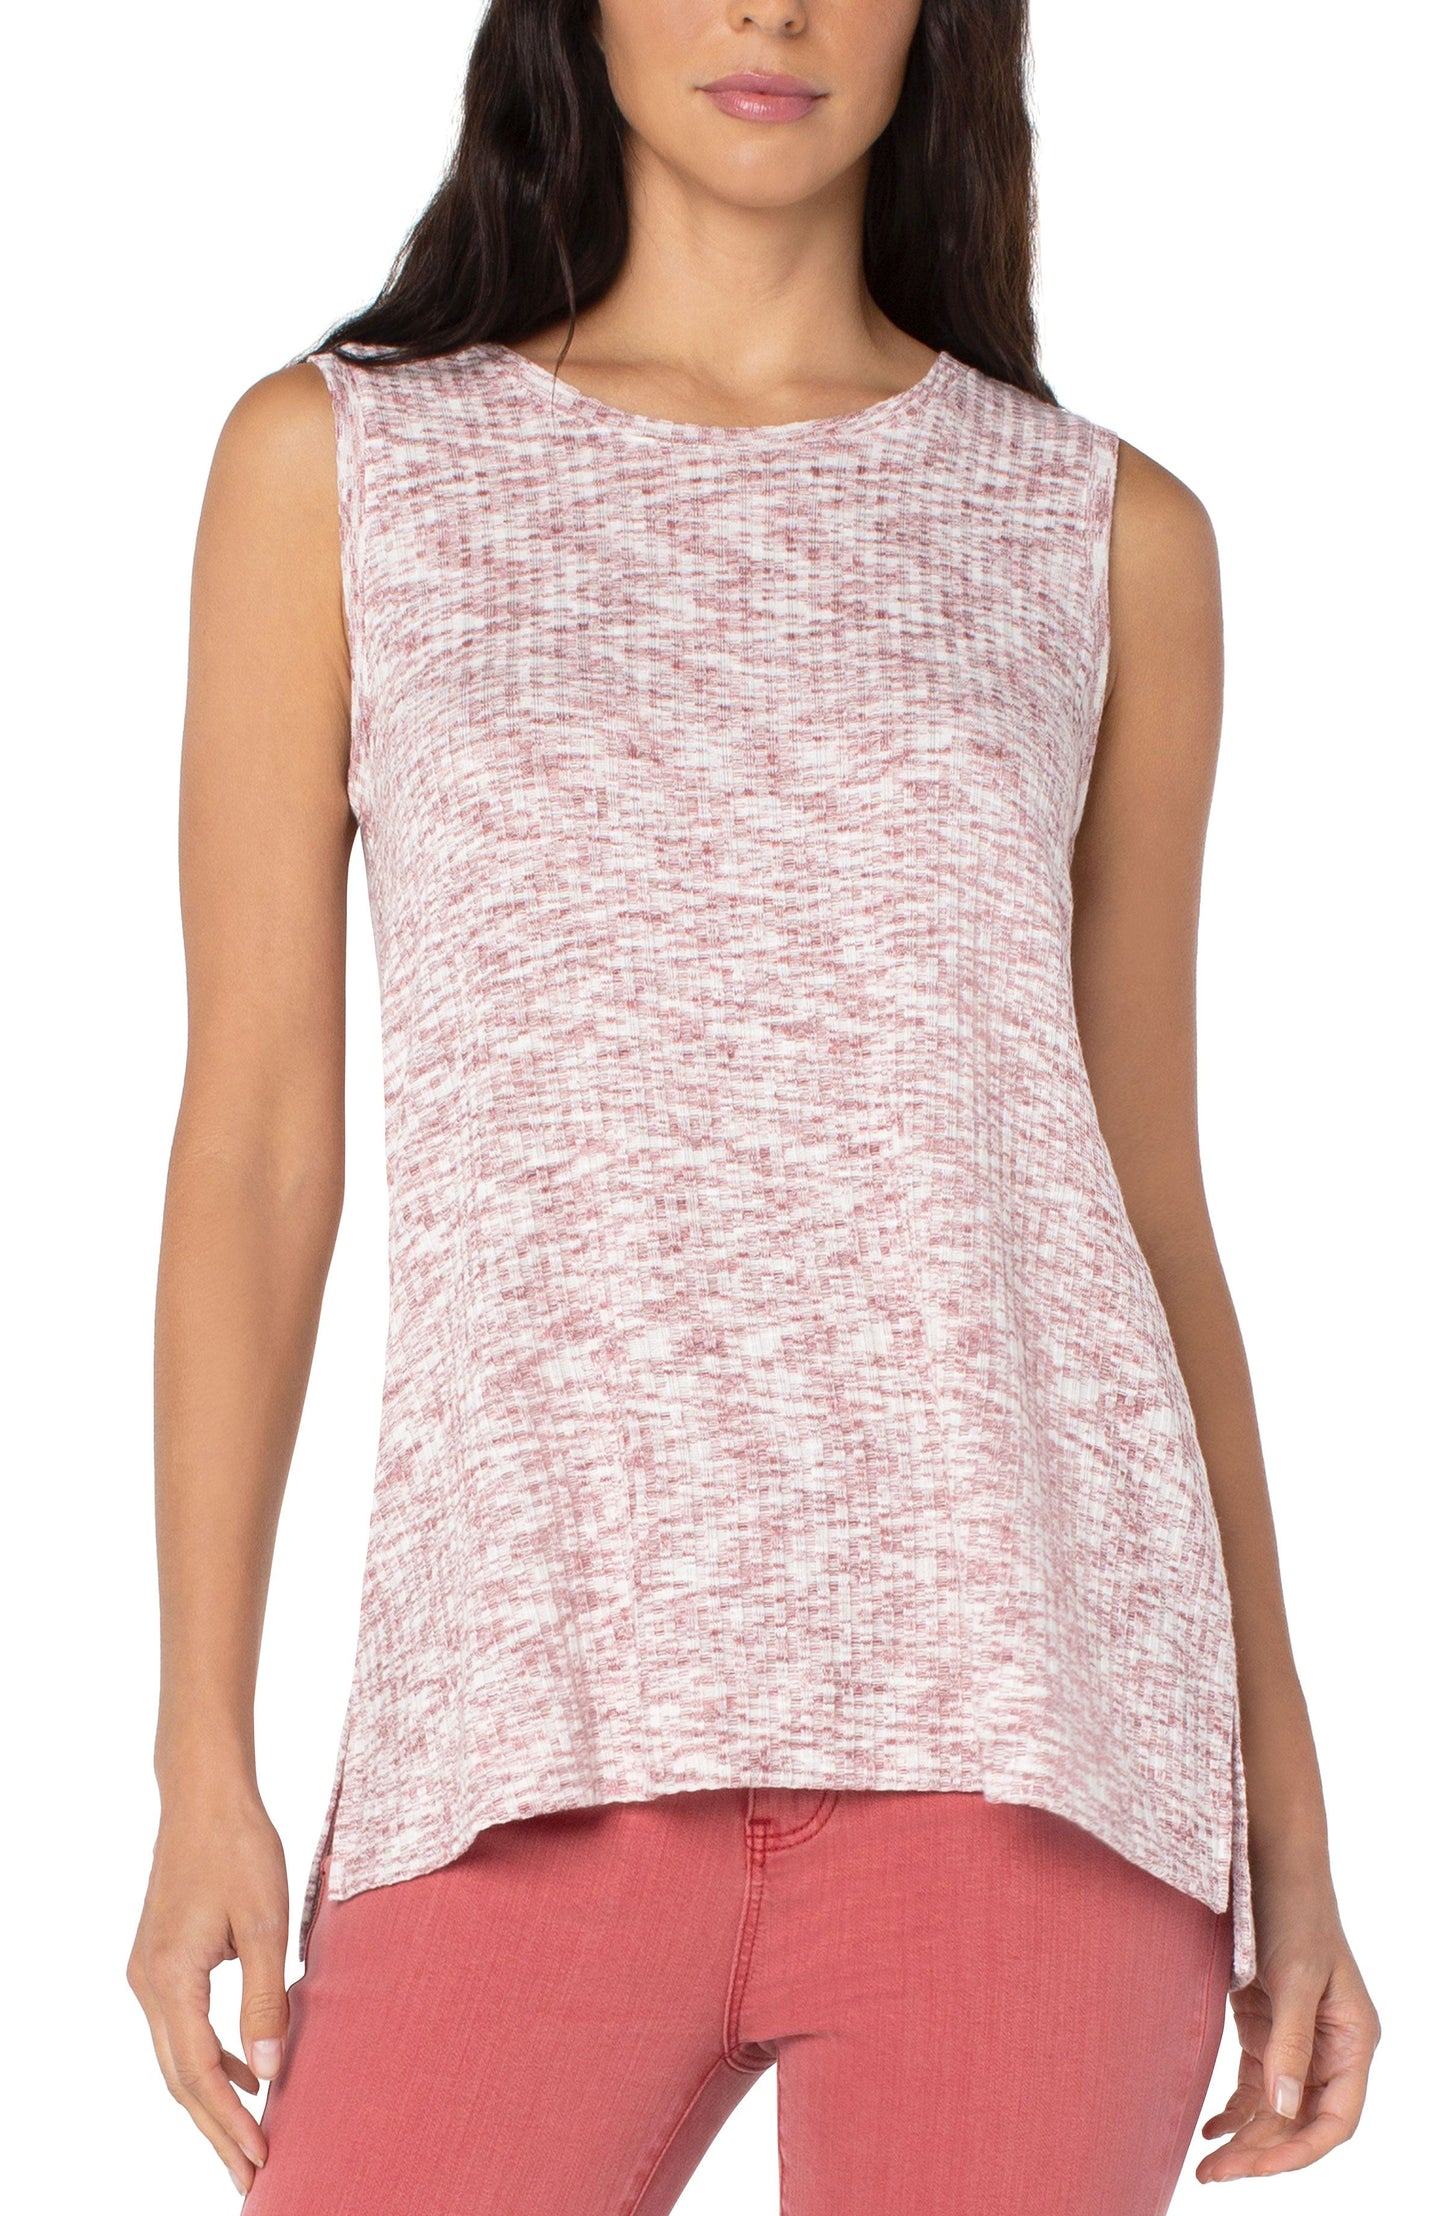 Liverpool Sleeveless Scoop Neck Knit Top (space dye pink/Cream)